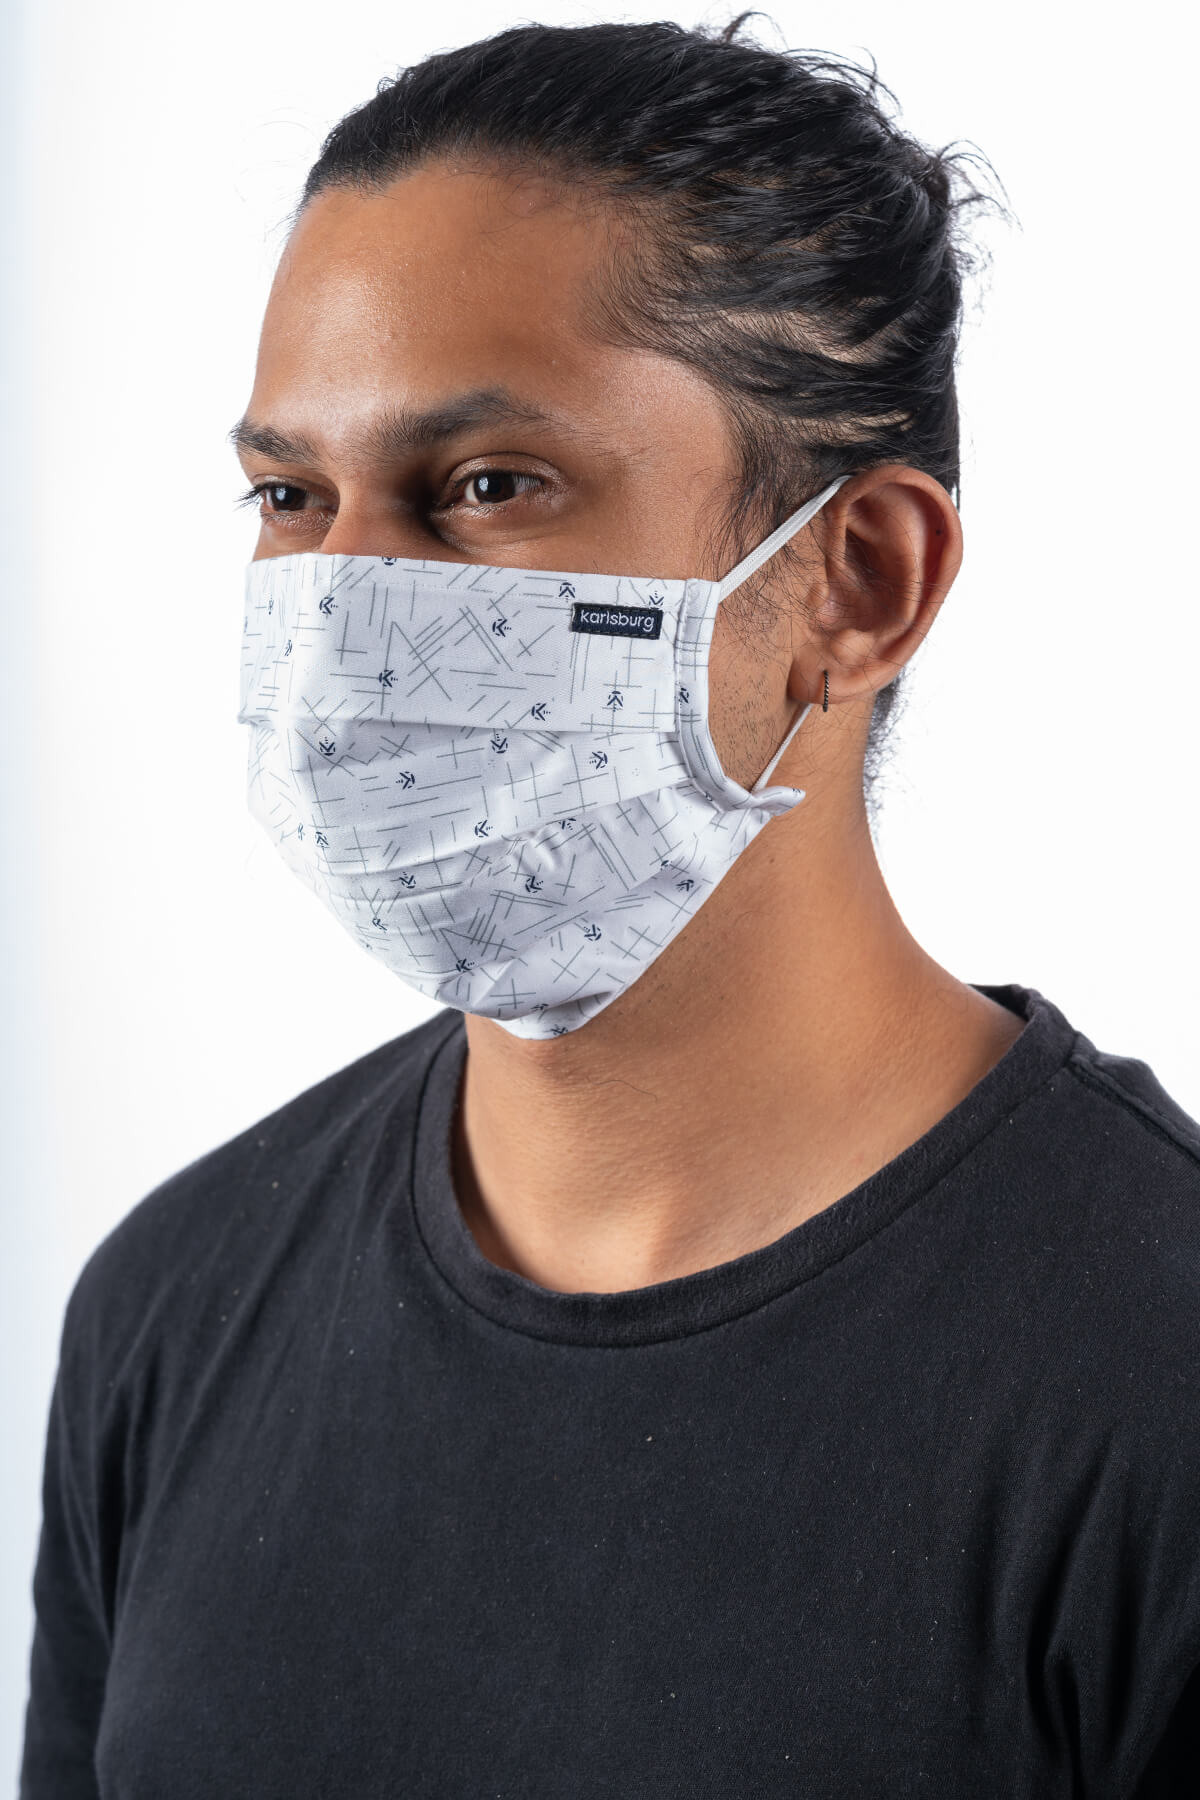 White and Black Adult Face Mask - Pack of 10